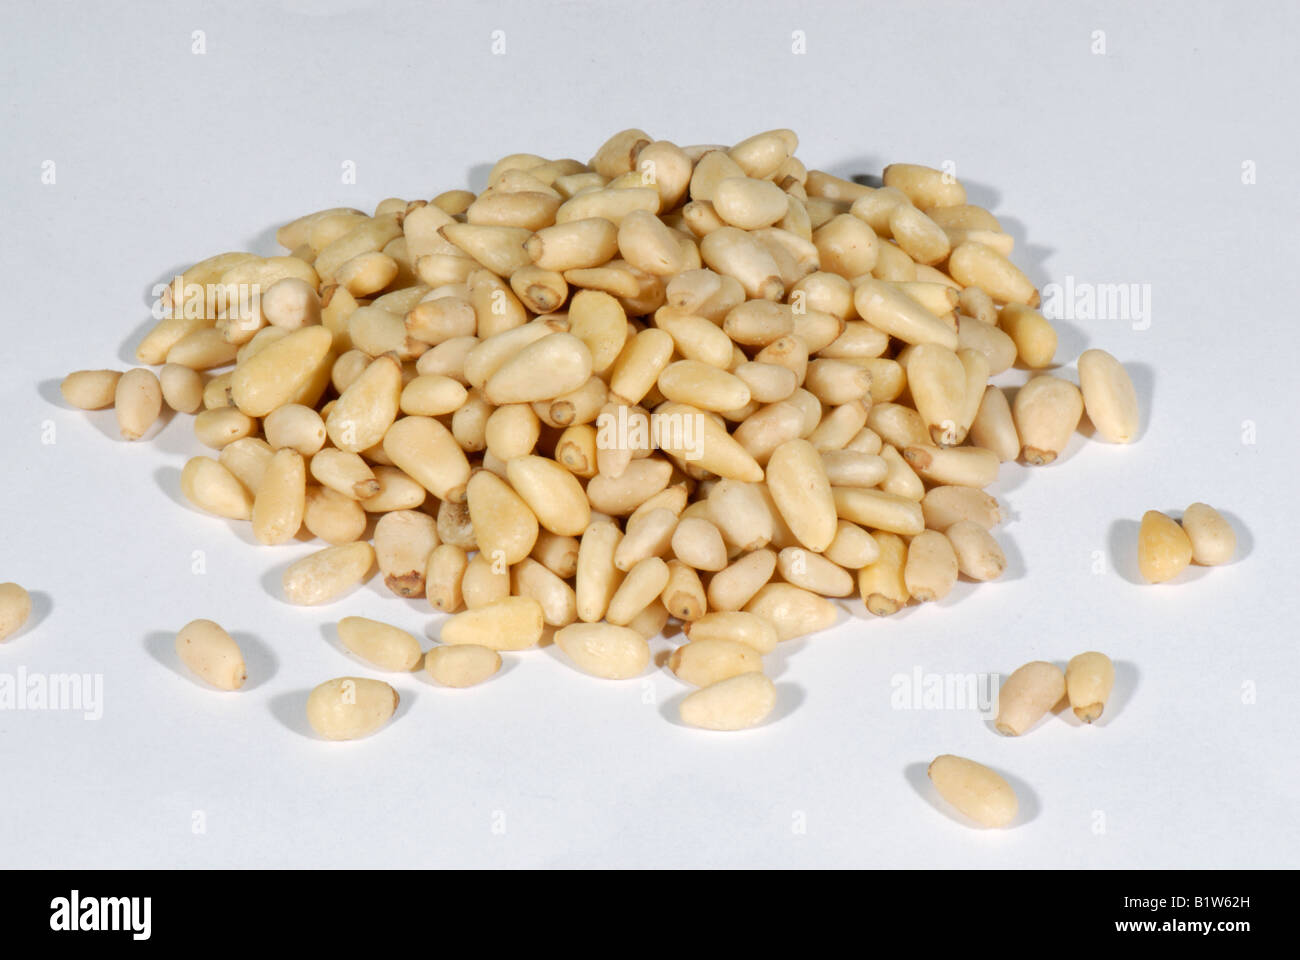 Pine nuts from the stone pine Pinus pinea as sold in health food shops Stock Photo